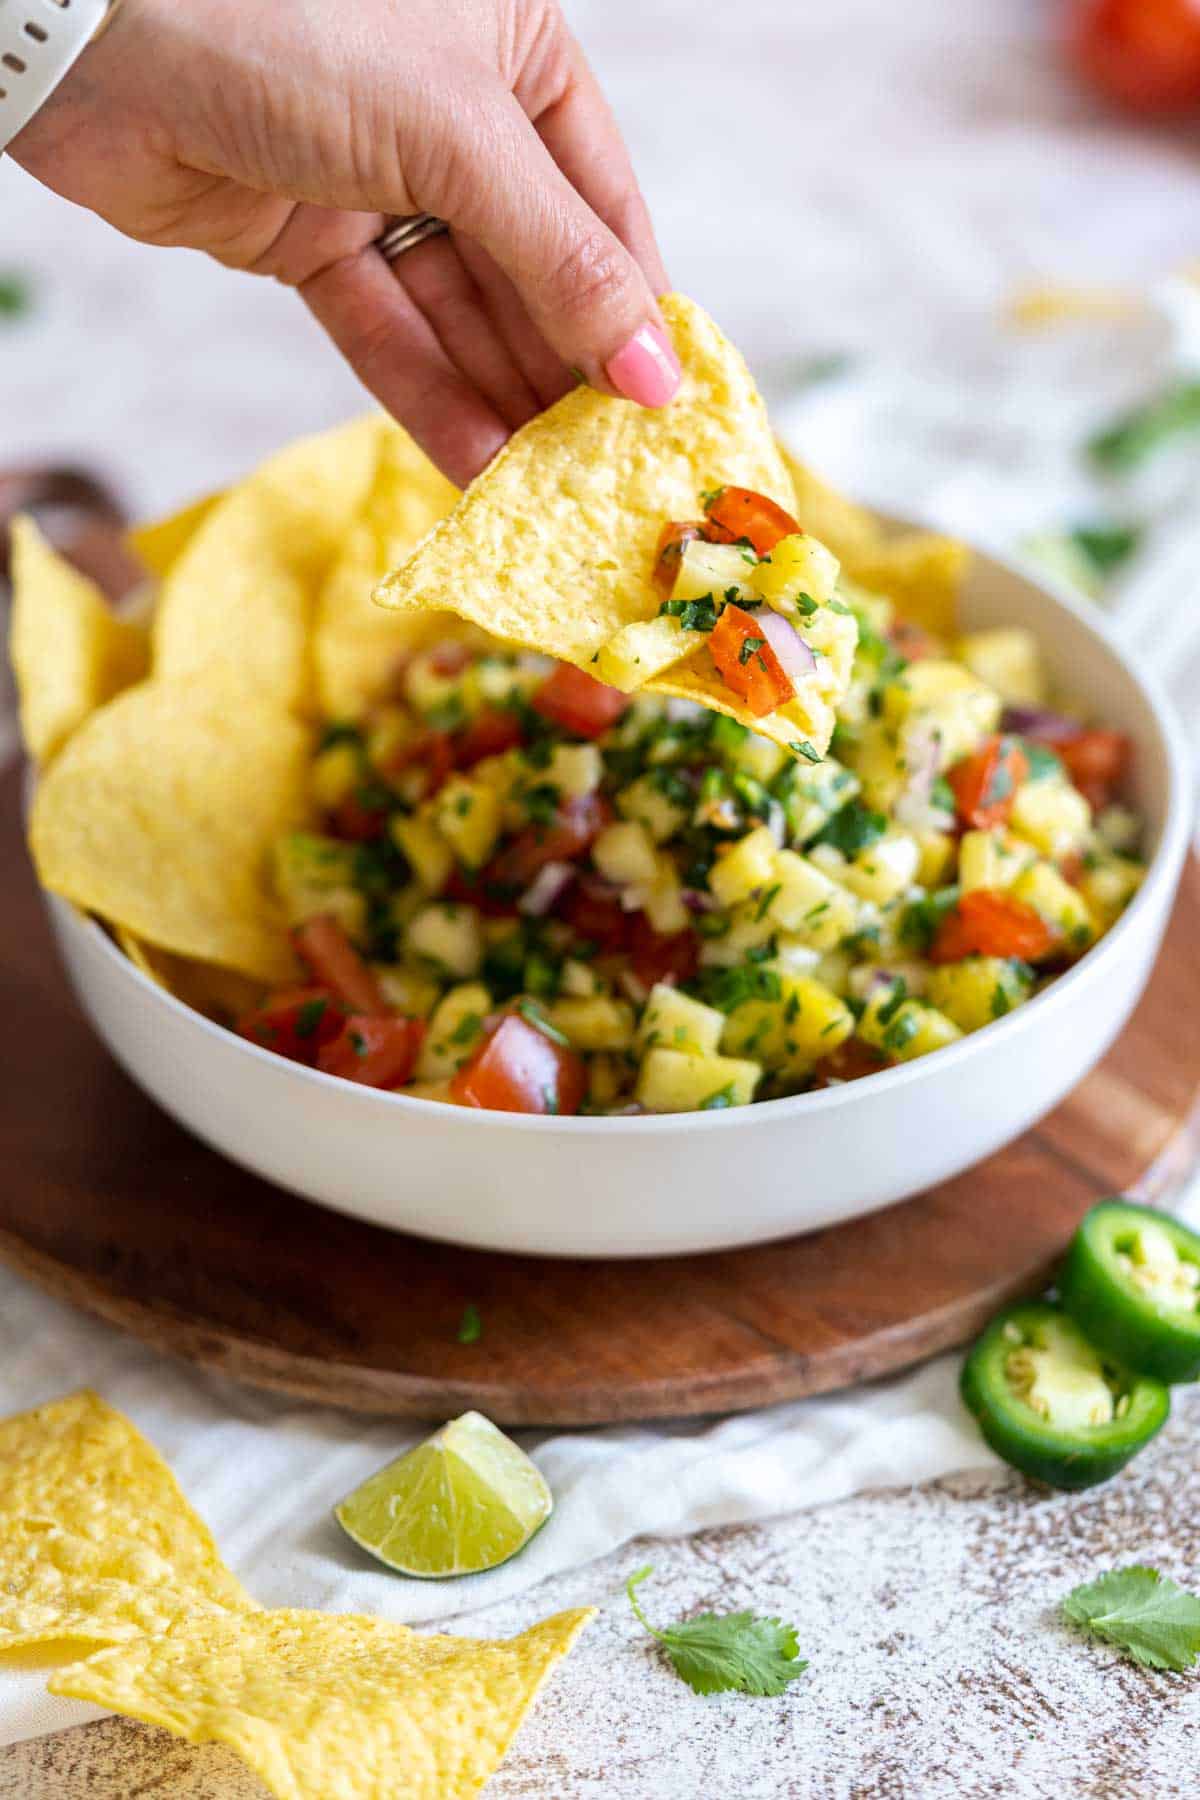 Dipping a chip into salsa.